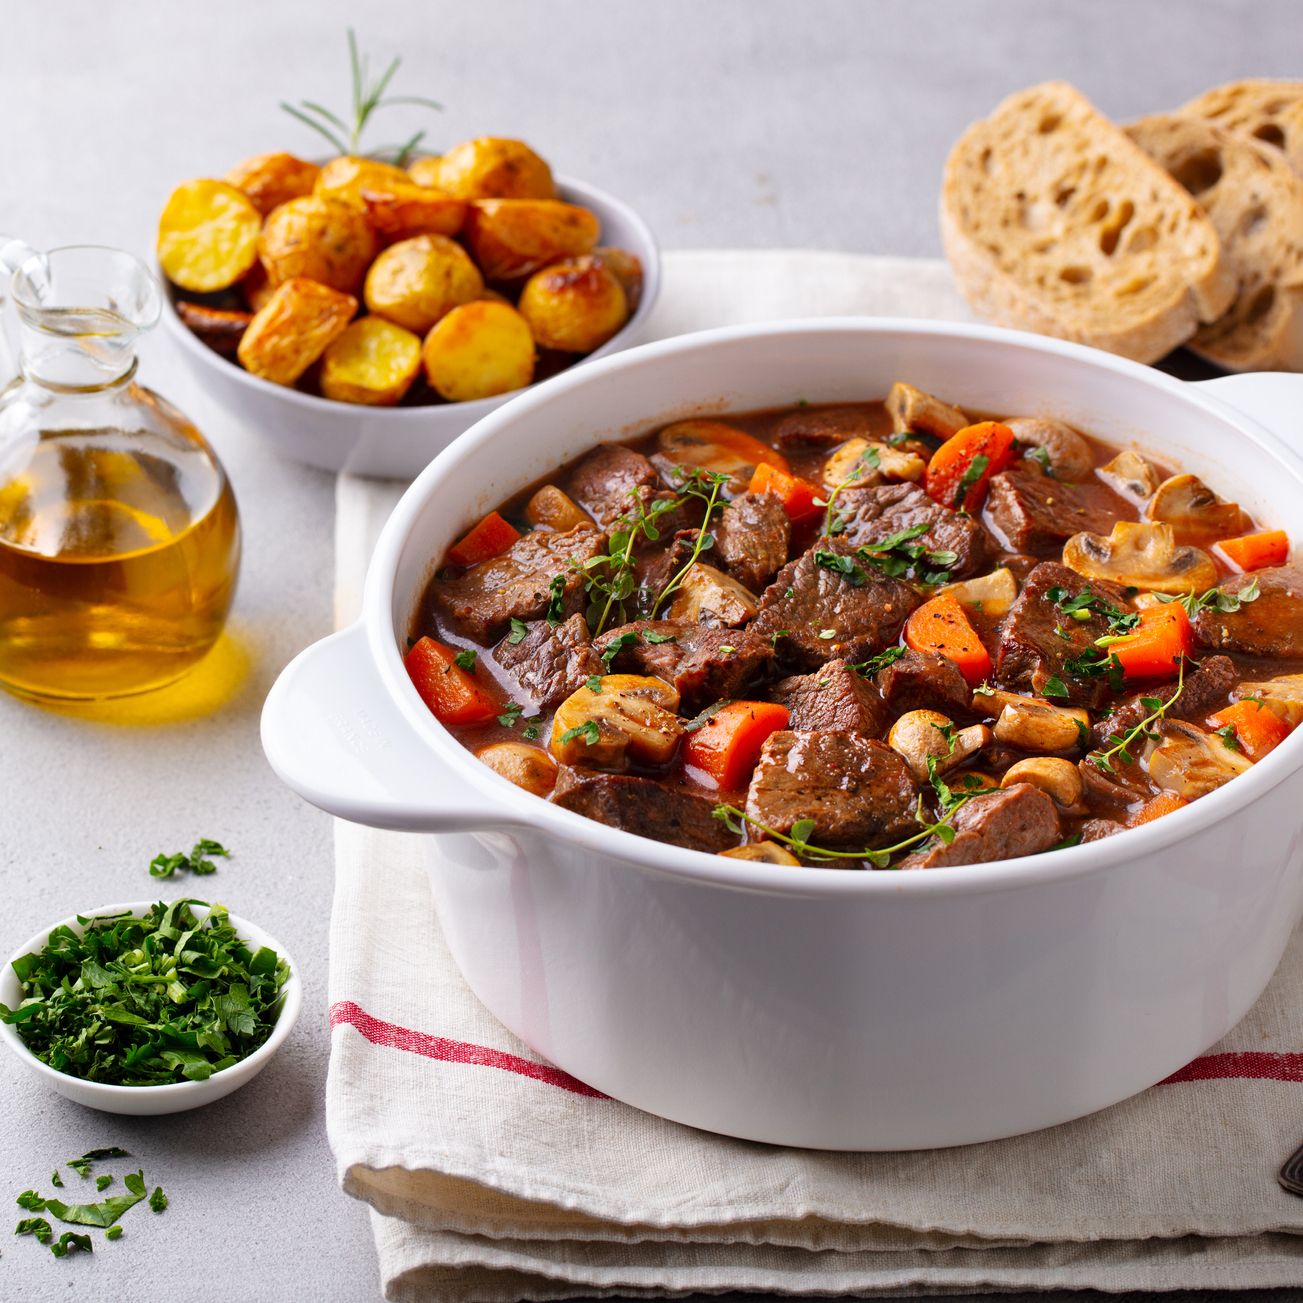 Beef-bourguignon-stew-with-vegetables.-Grey-background.-Copy-space.-1215094848_2306x1305 square.jpeg